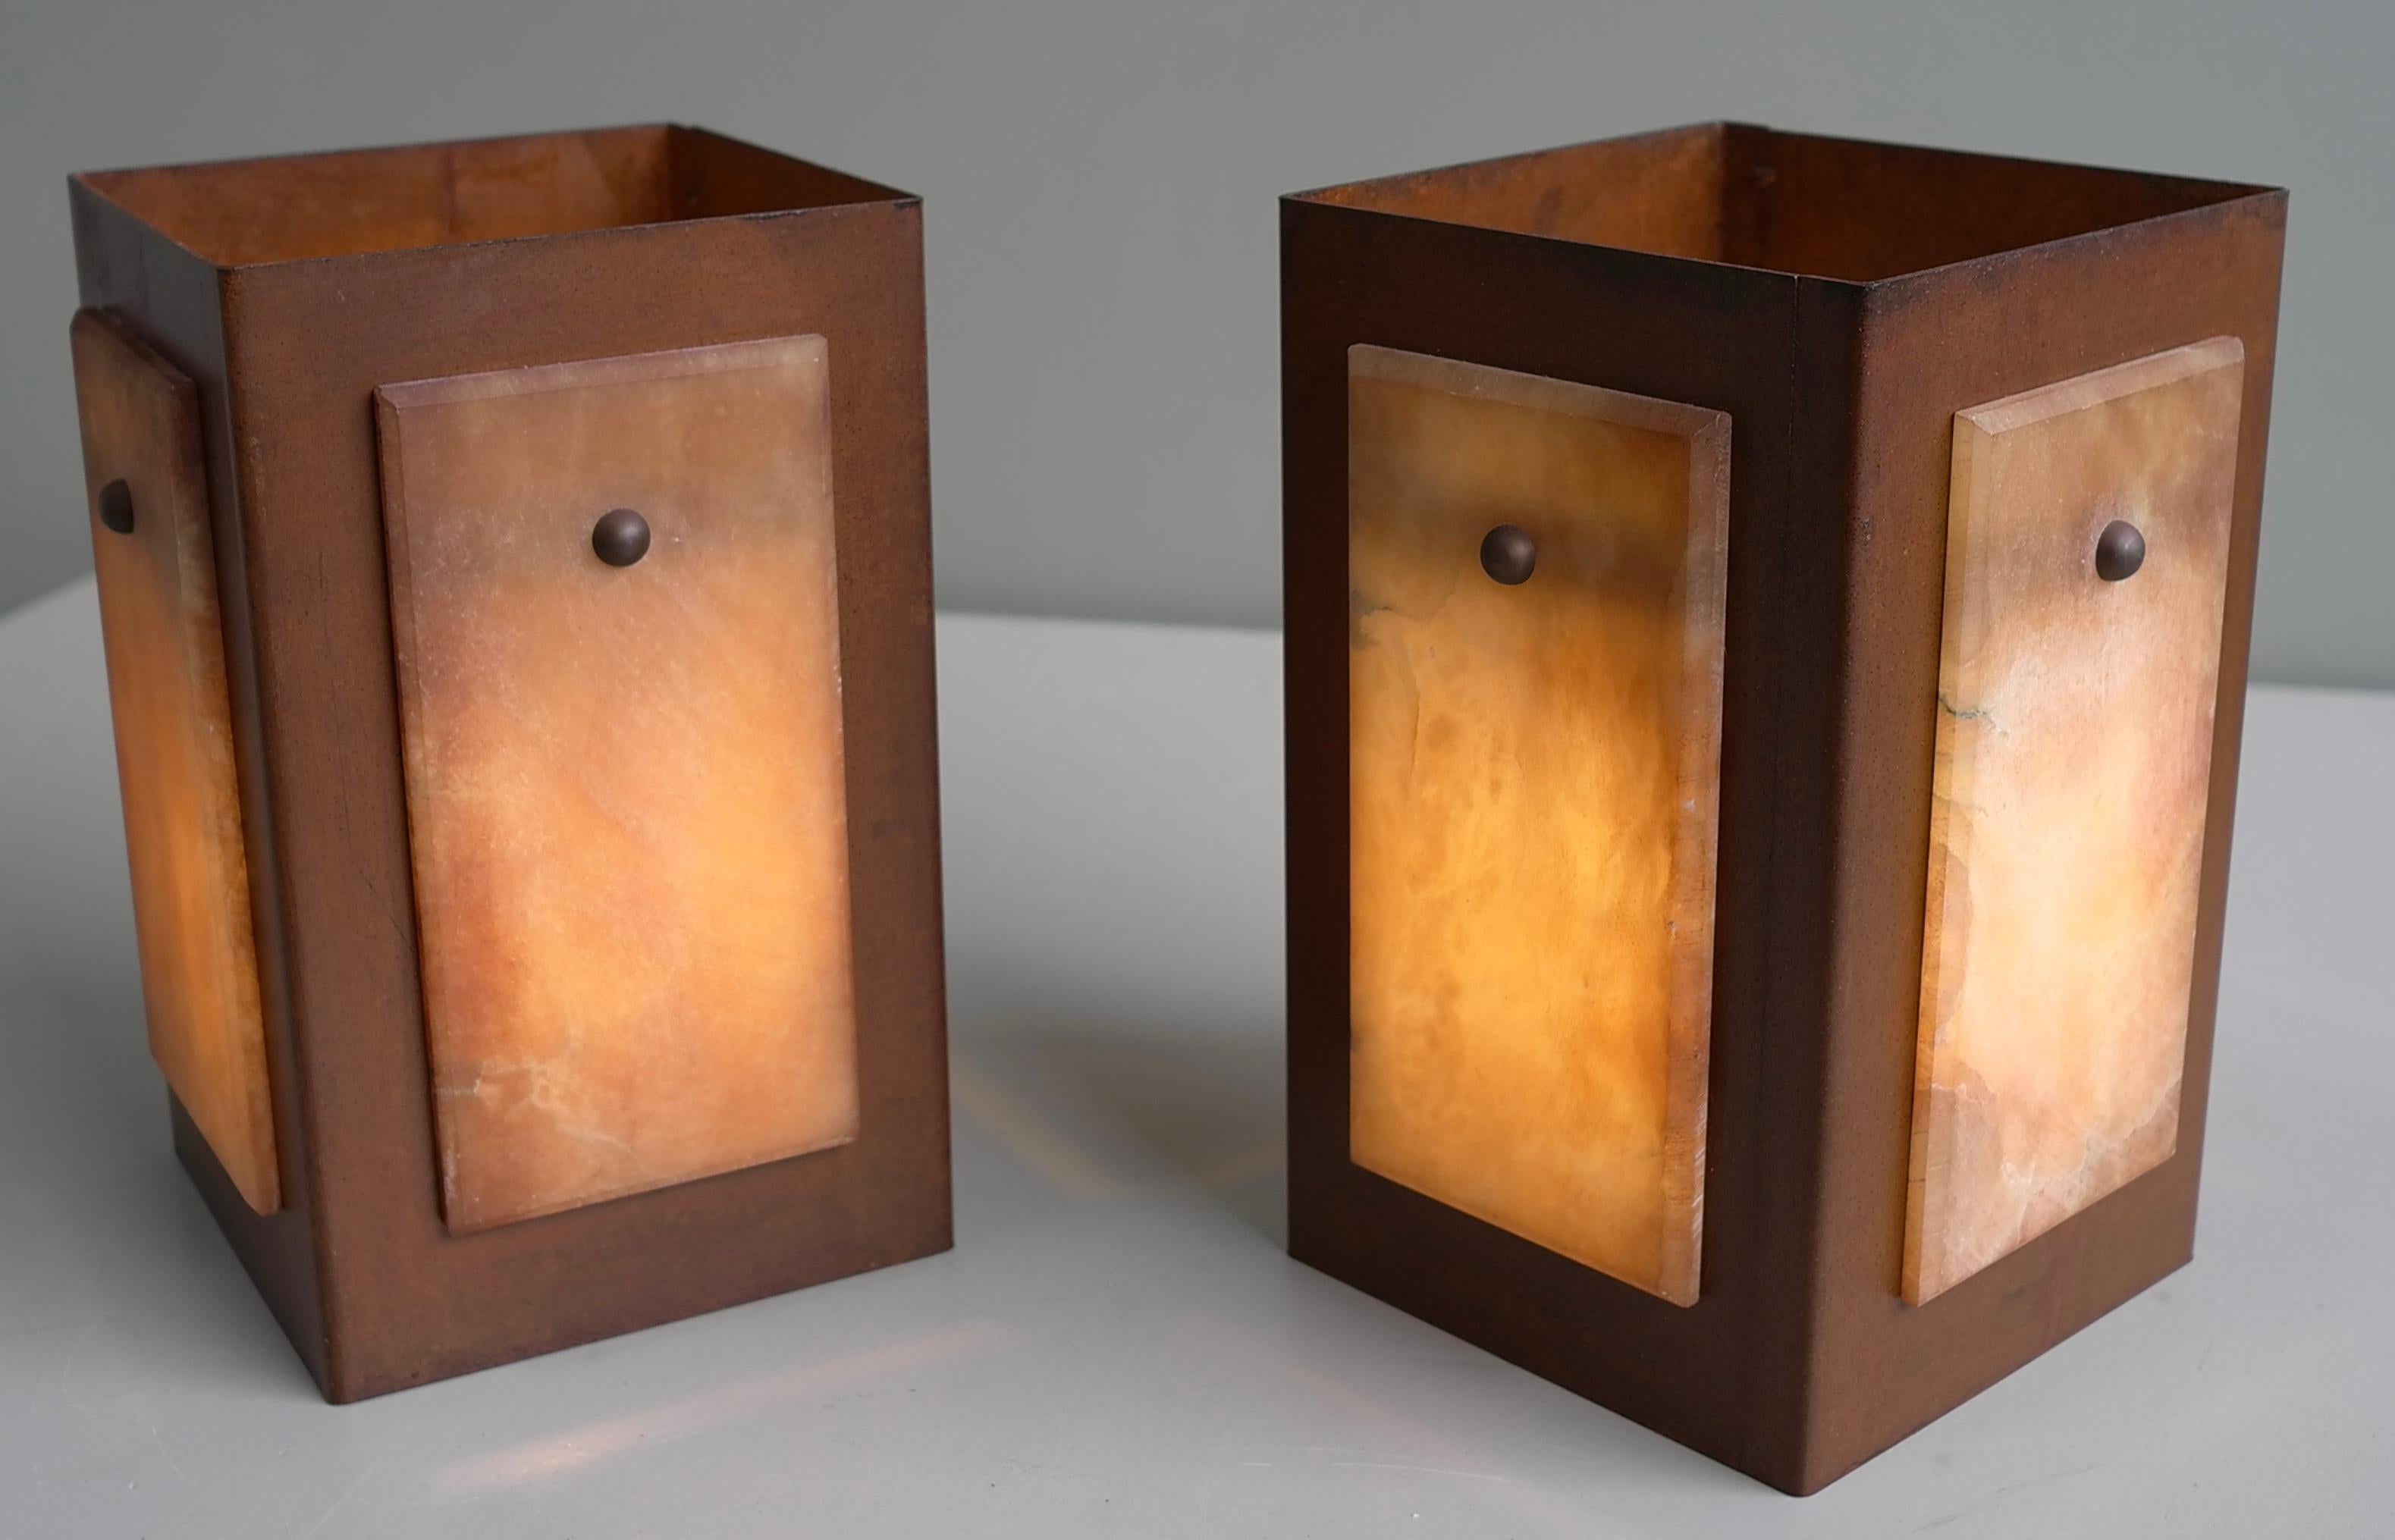 Table Lamps in Alabaster Stone and Rusty Metal by Pegasam, Spain 1970s

Gives a very nice warm and atmospheric light.